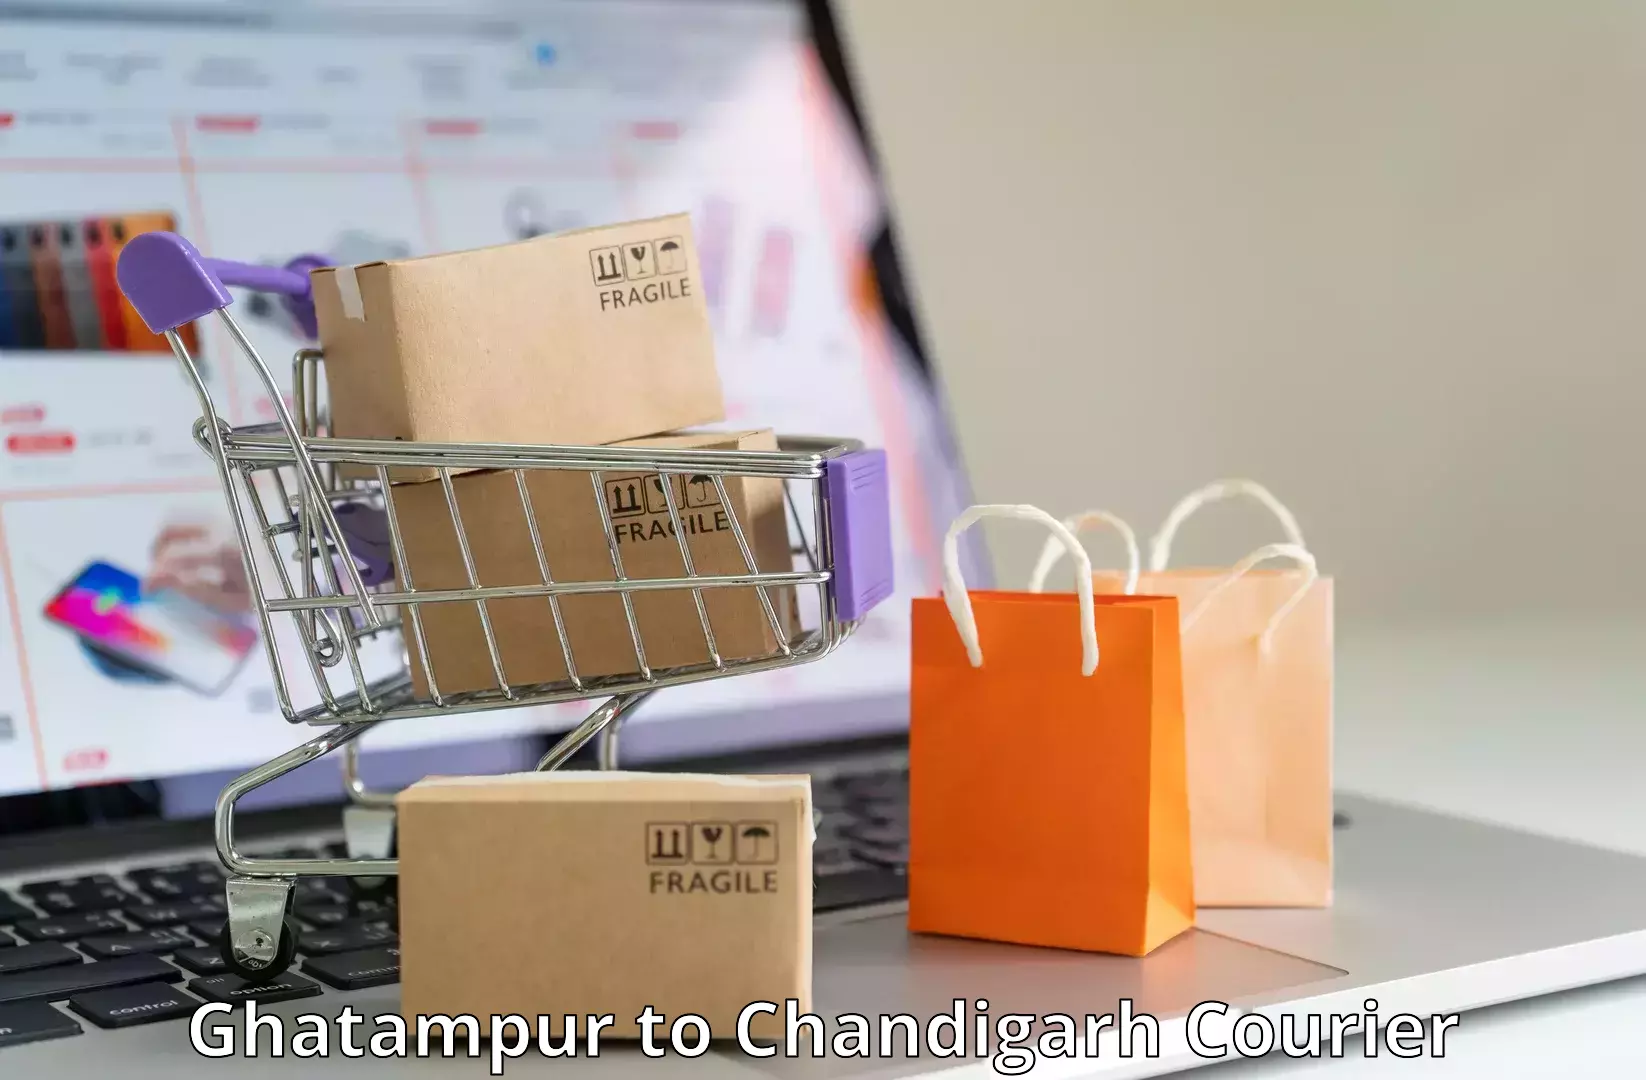 Local delivery service Ghatampur to Panjab University Chandigarh